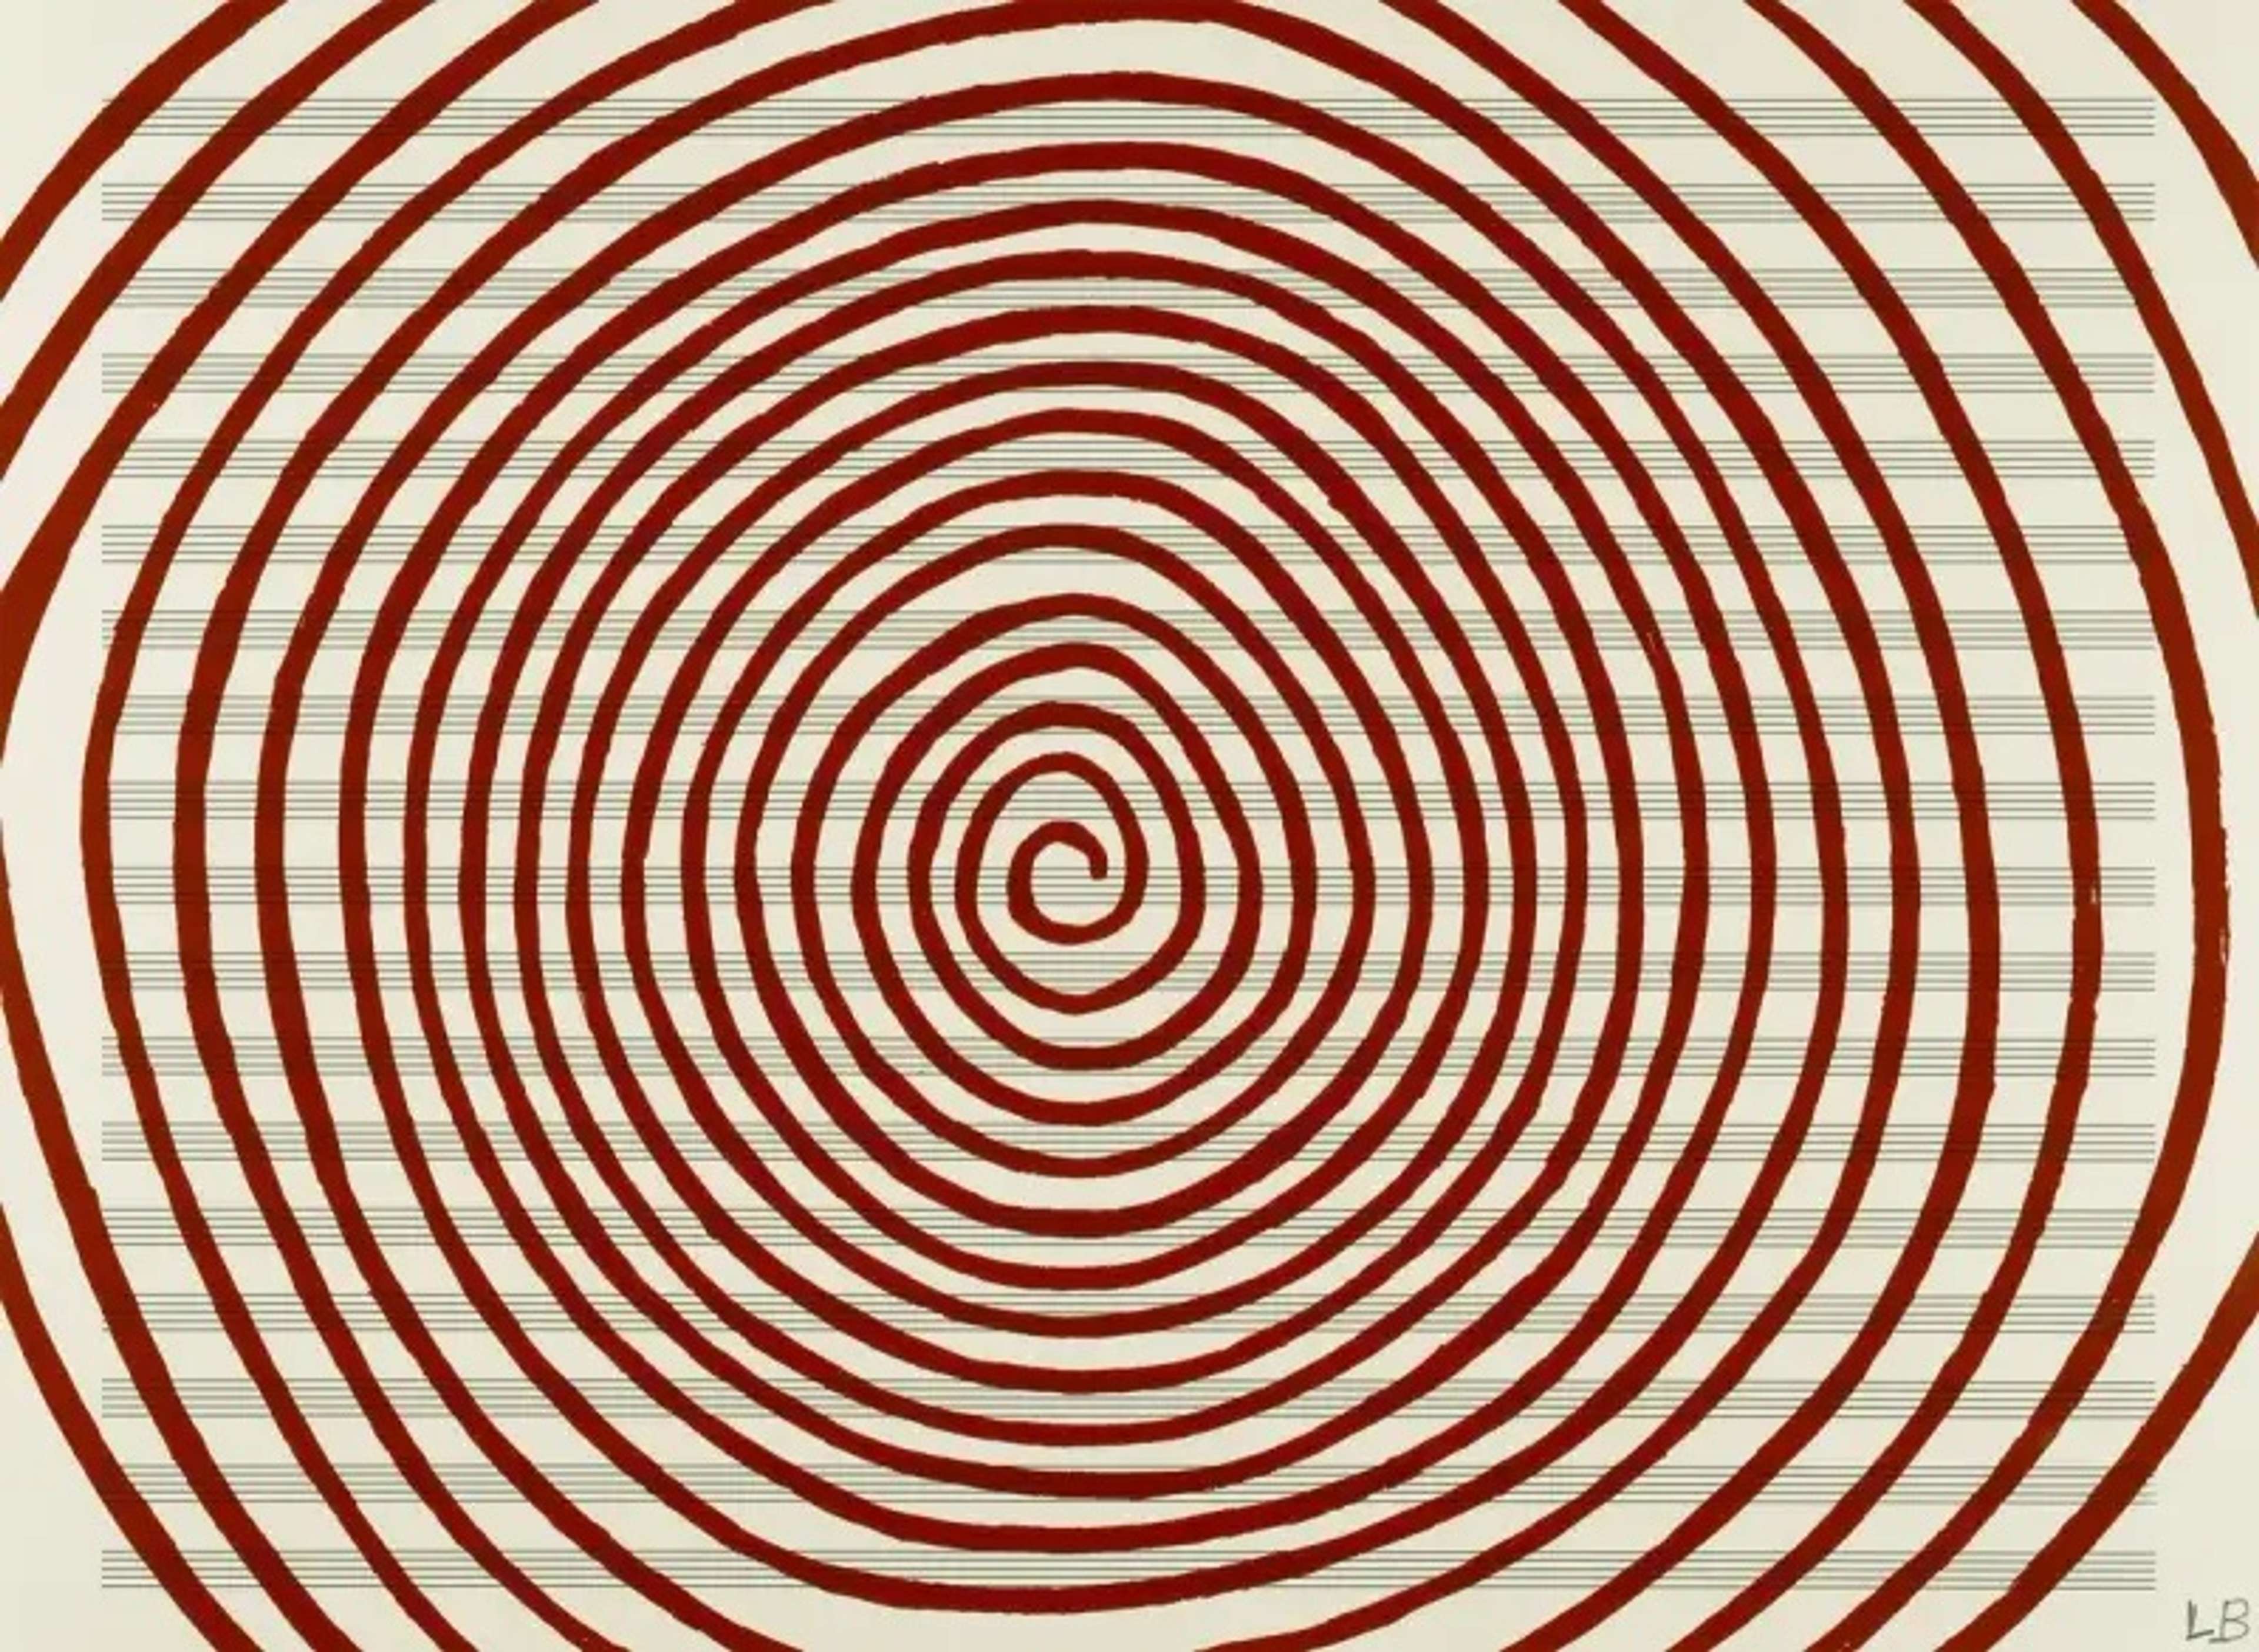 Louise Bourgeois’ Untitled #11. A screenprint of a continuous red spiral against a sheet of horizontal lines.Louise Bourgeois’ Untitled #11. A screenprint of a continuous red spiral against a sheet of horizontal lines.